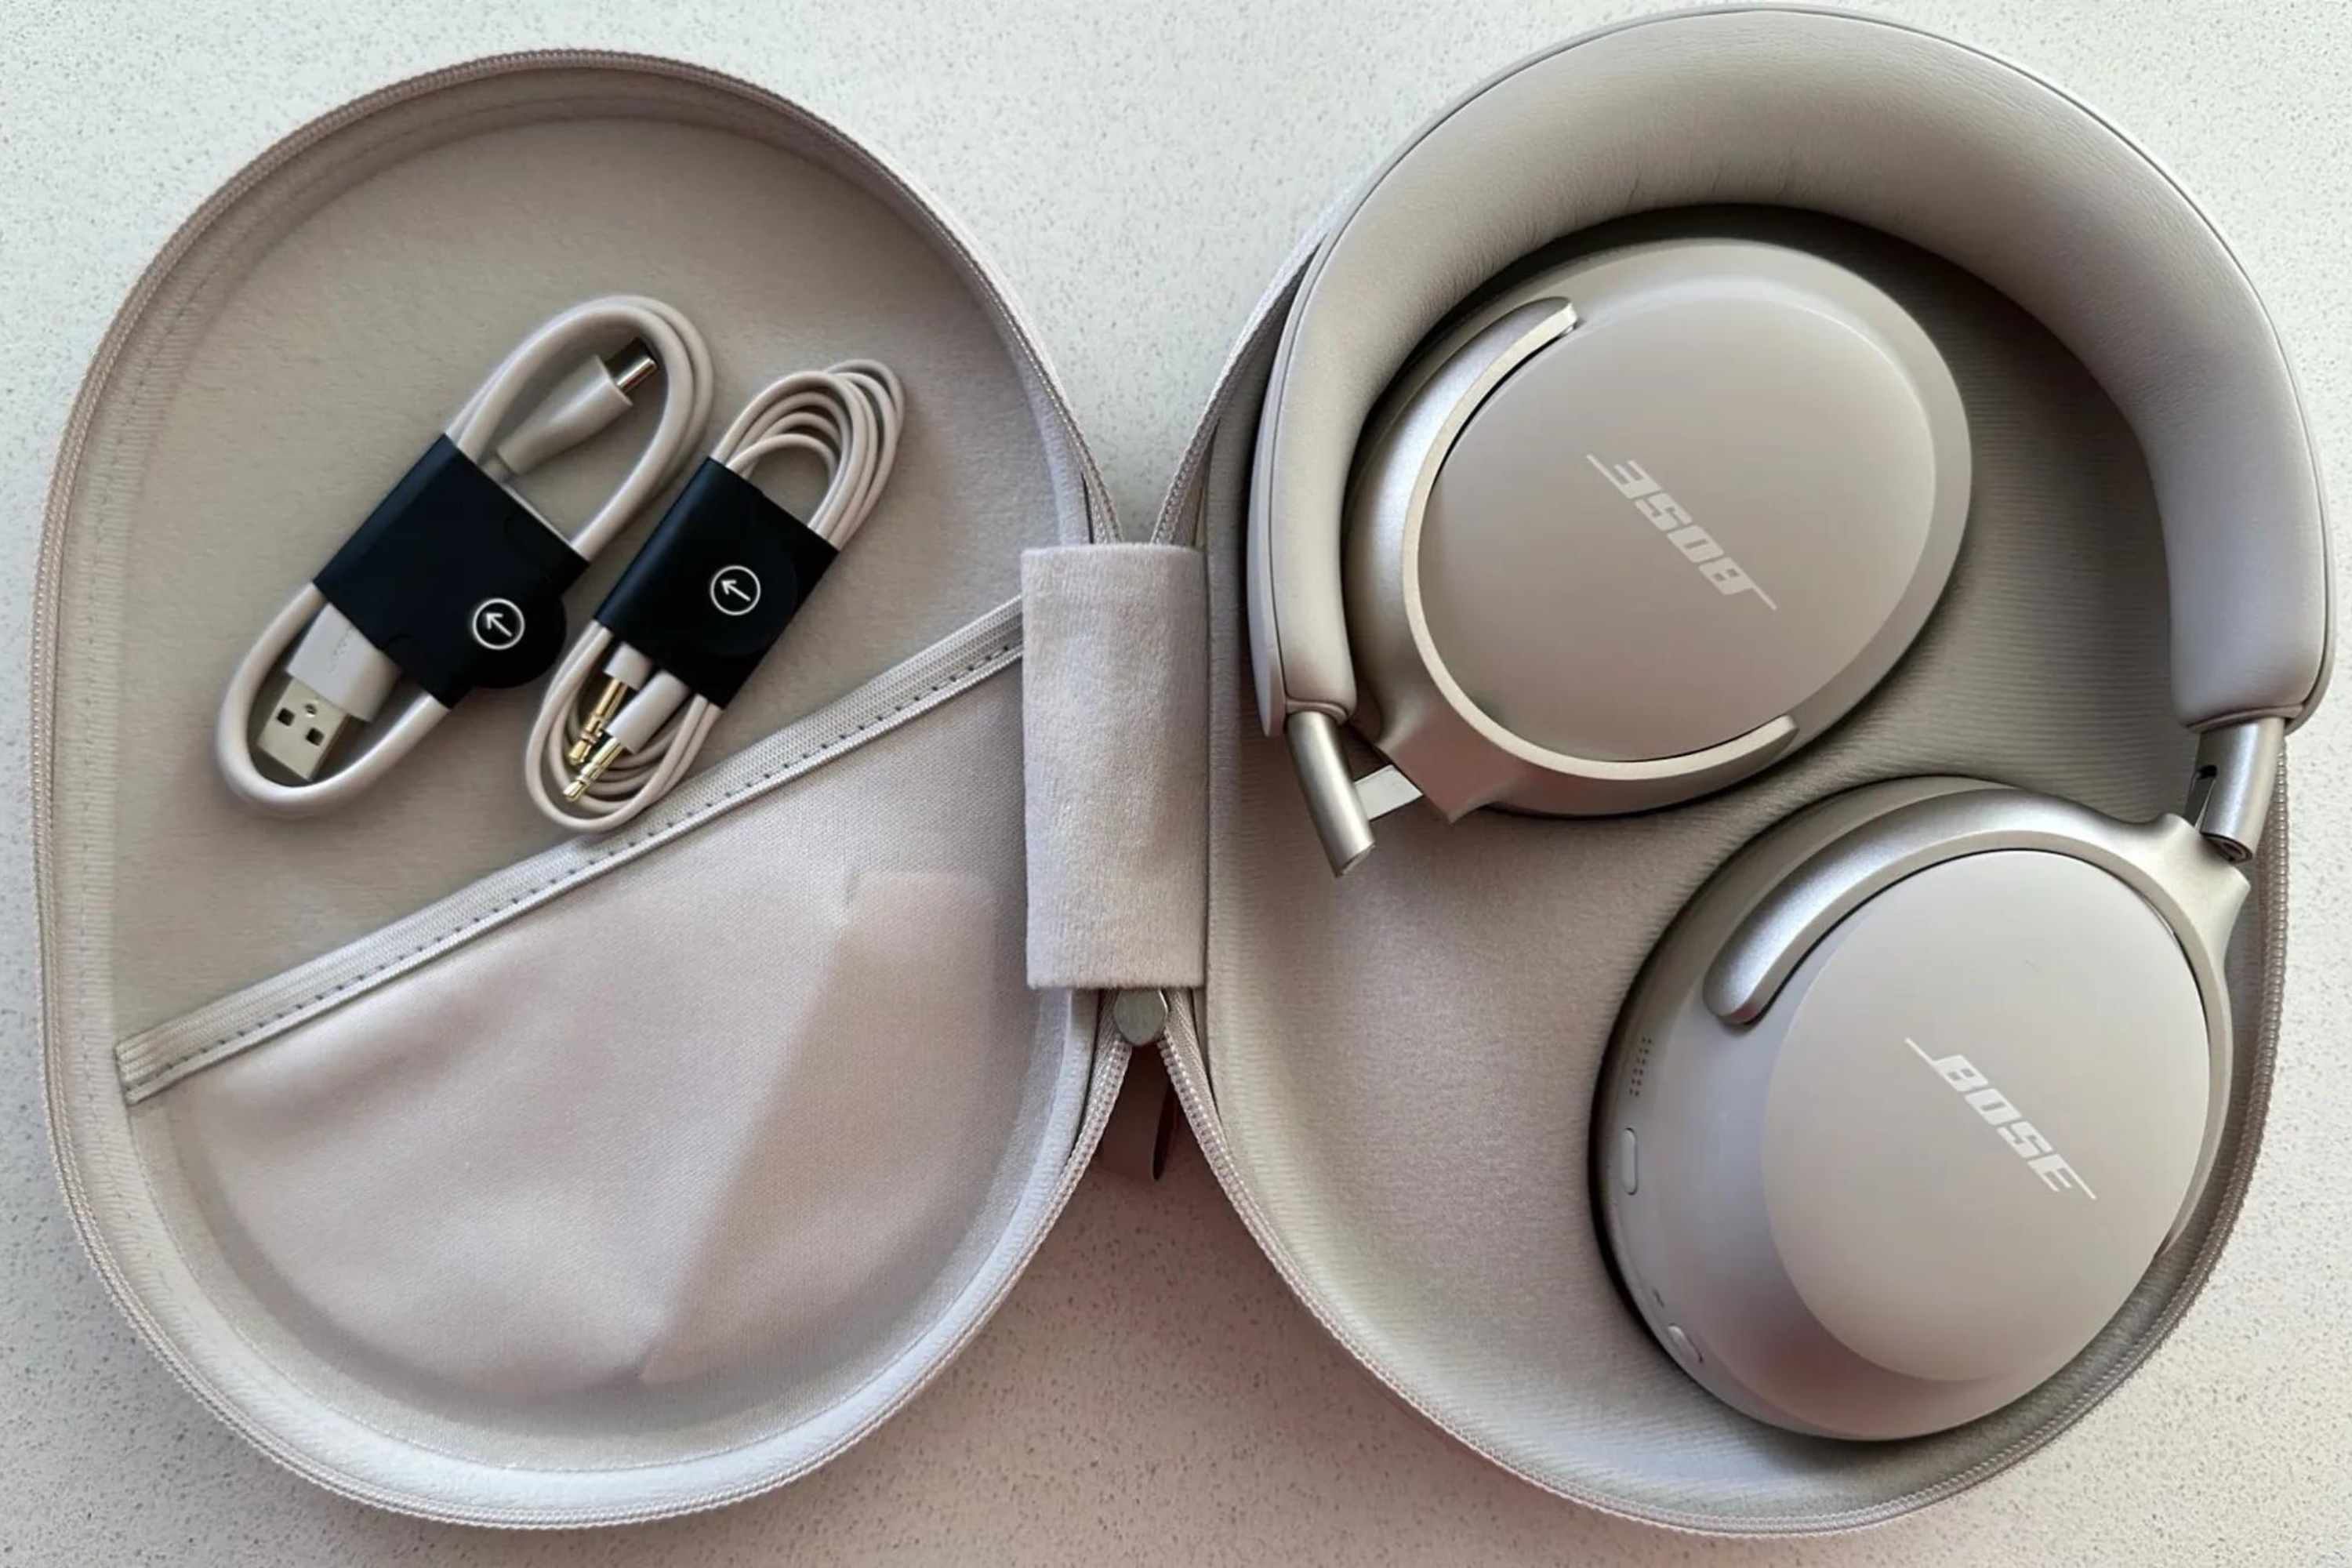 Bose's QuietComfort Ultra Headphones have plunged to a new all